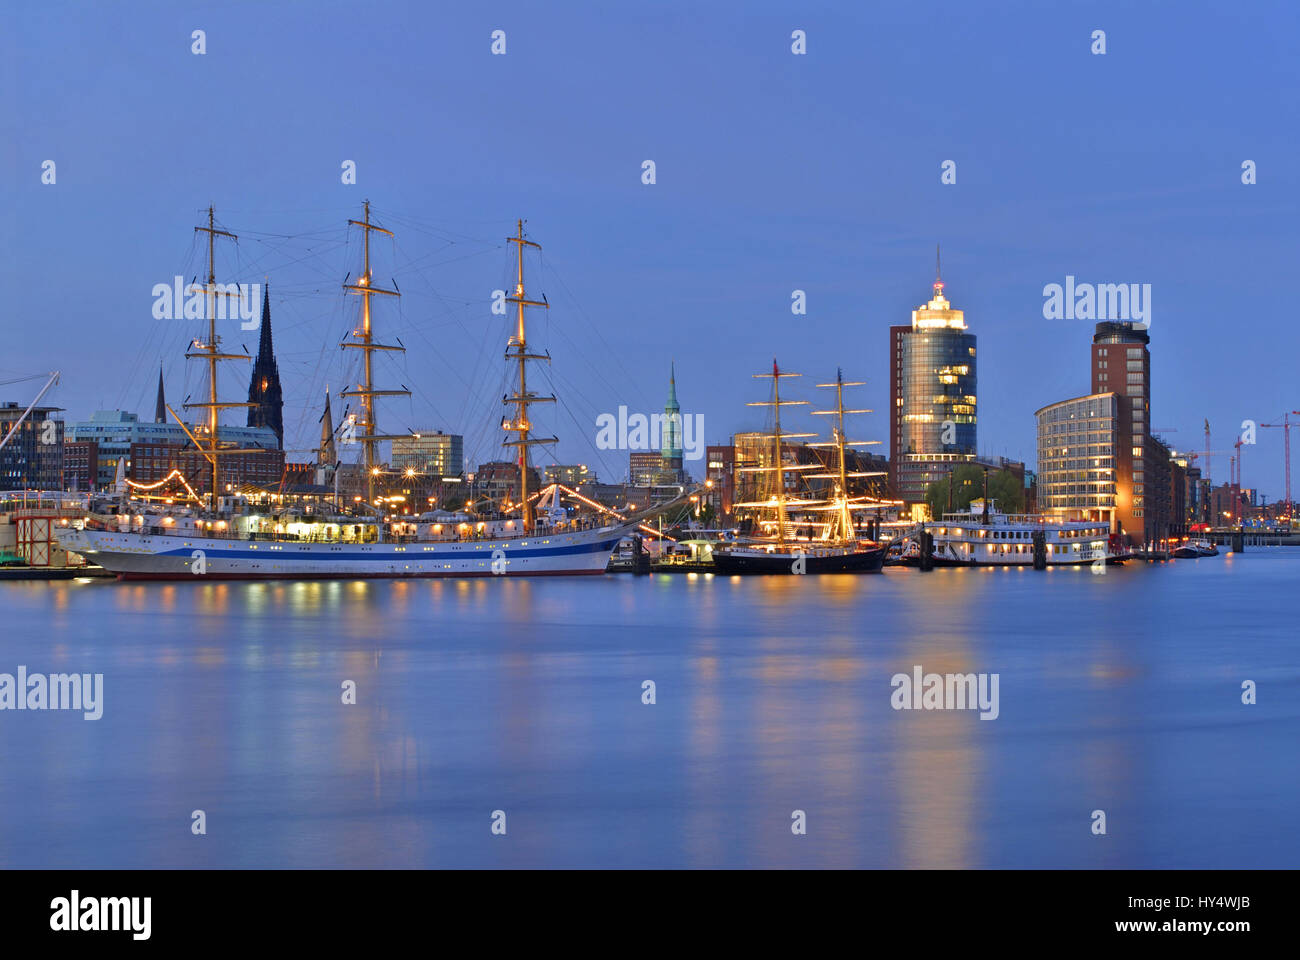 Germany, Hamburg, town, towns, hamburgers, harbour, evening, in the evening, in, dusk, dusk, dim light, sailing ship, sailing ships, to Me, Russian, R Stock Photo